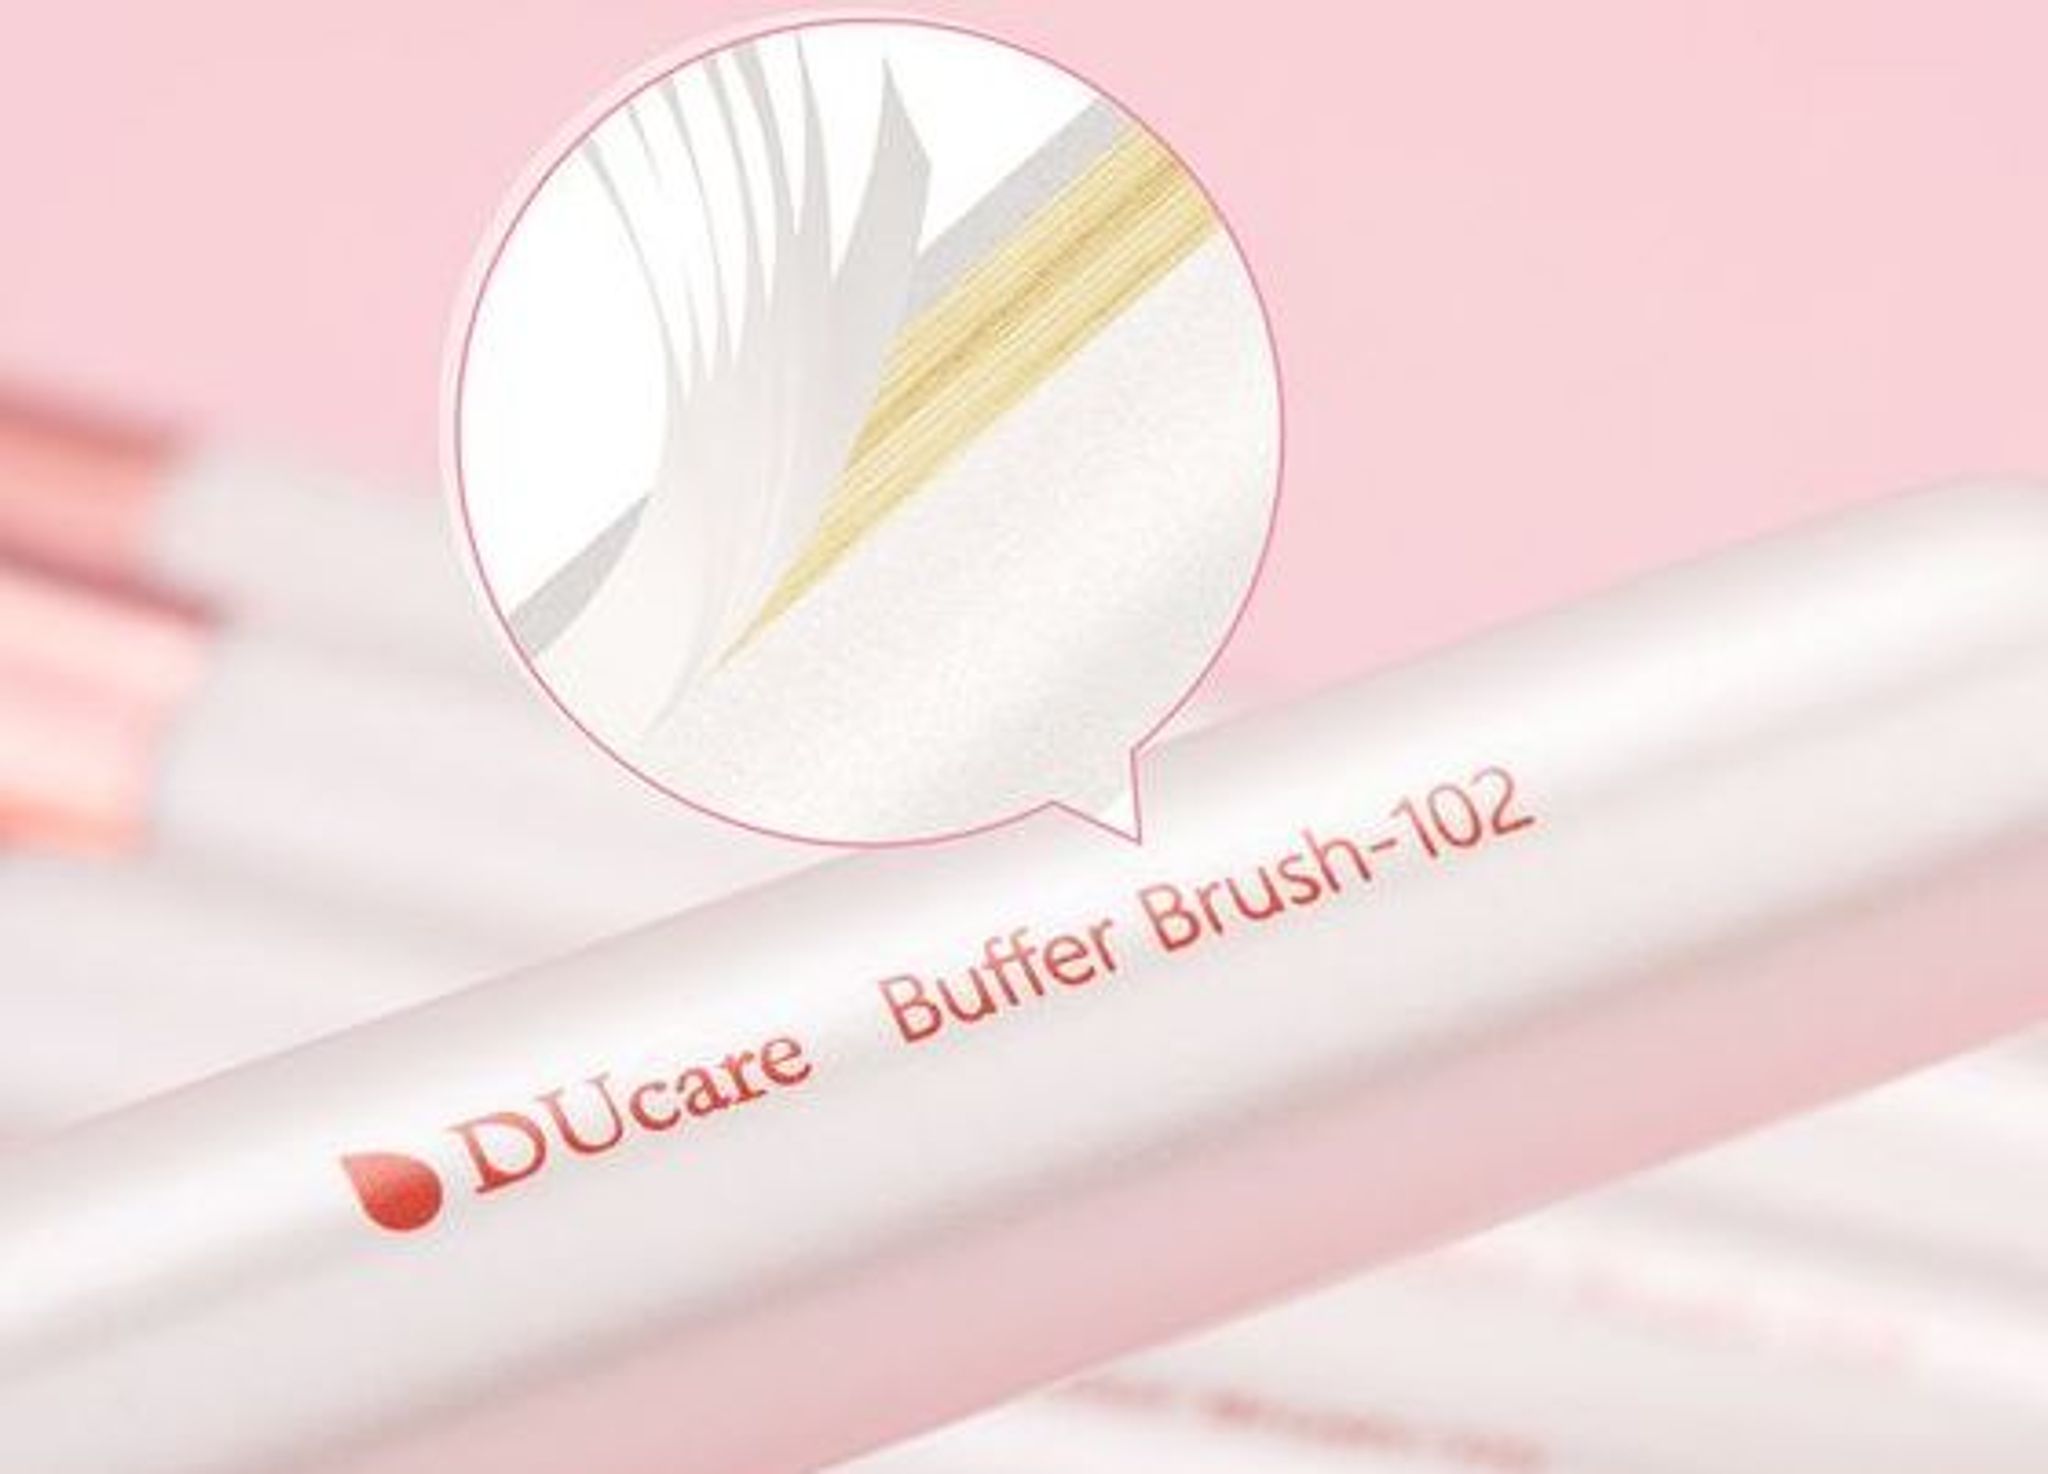 DUcare Beauty makeup brushes white angel wooden handle